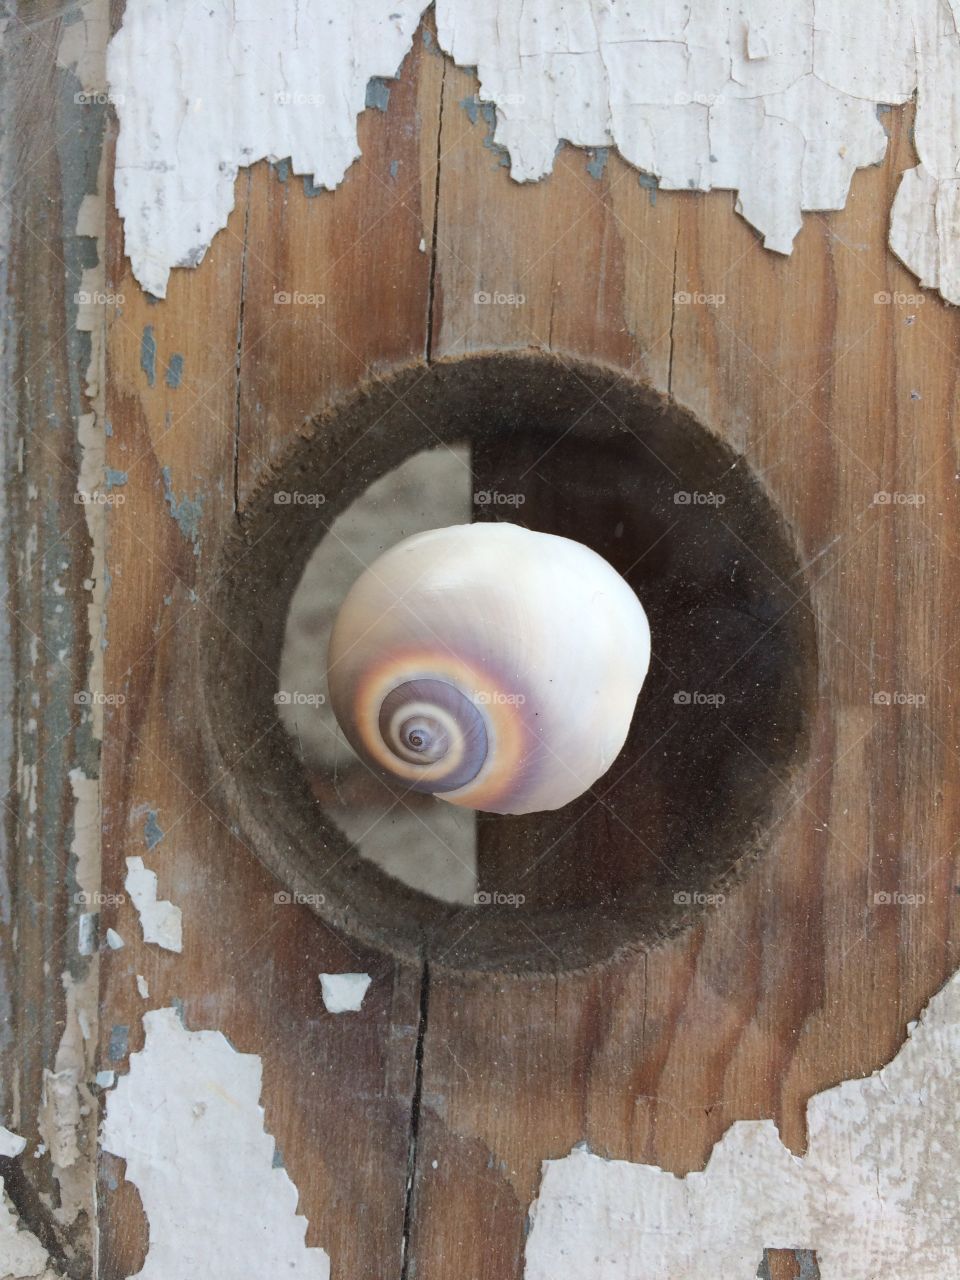 Spiral seashell floating where a doorknob once belonged in an old worn out door turned desktop. 